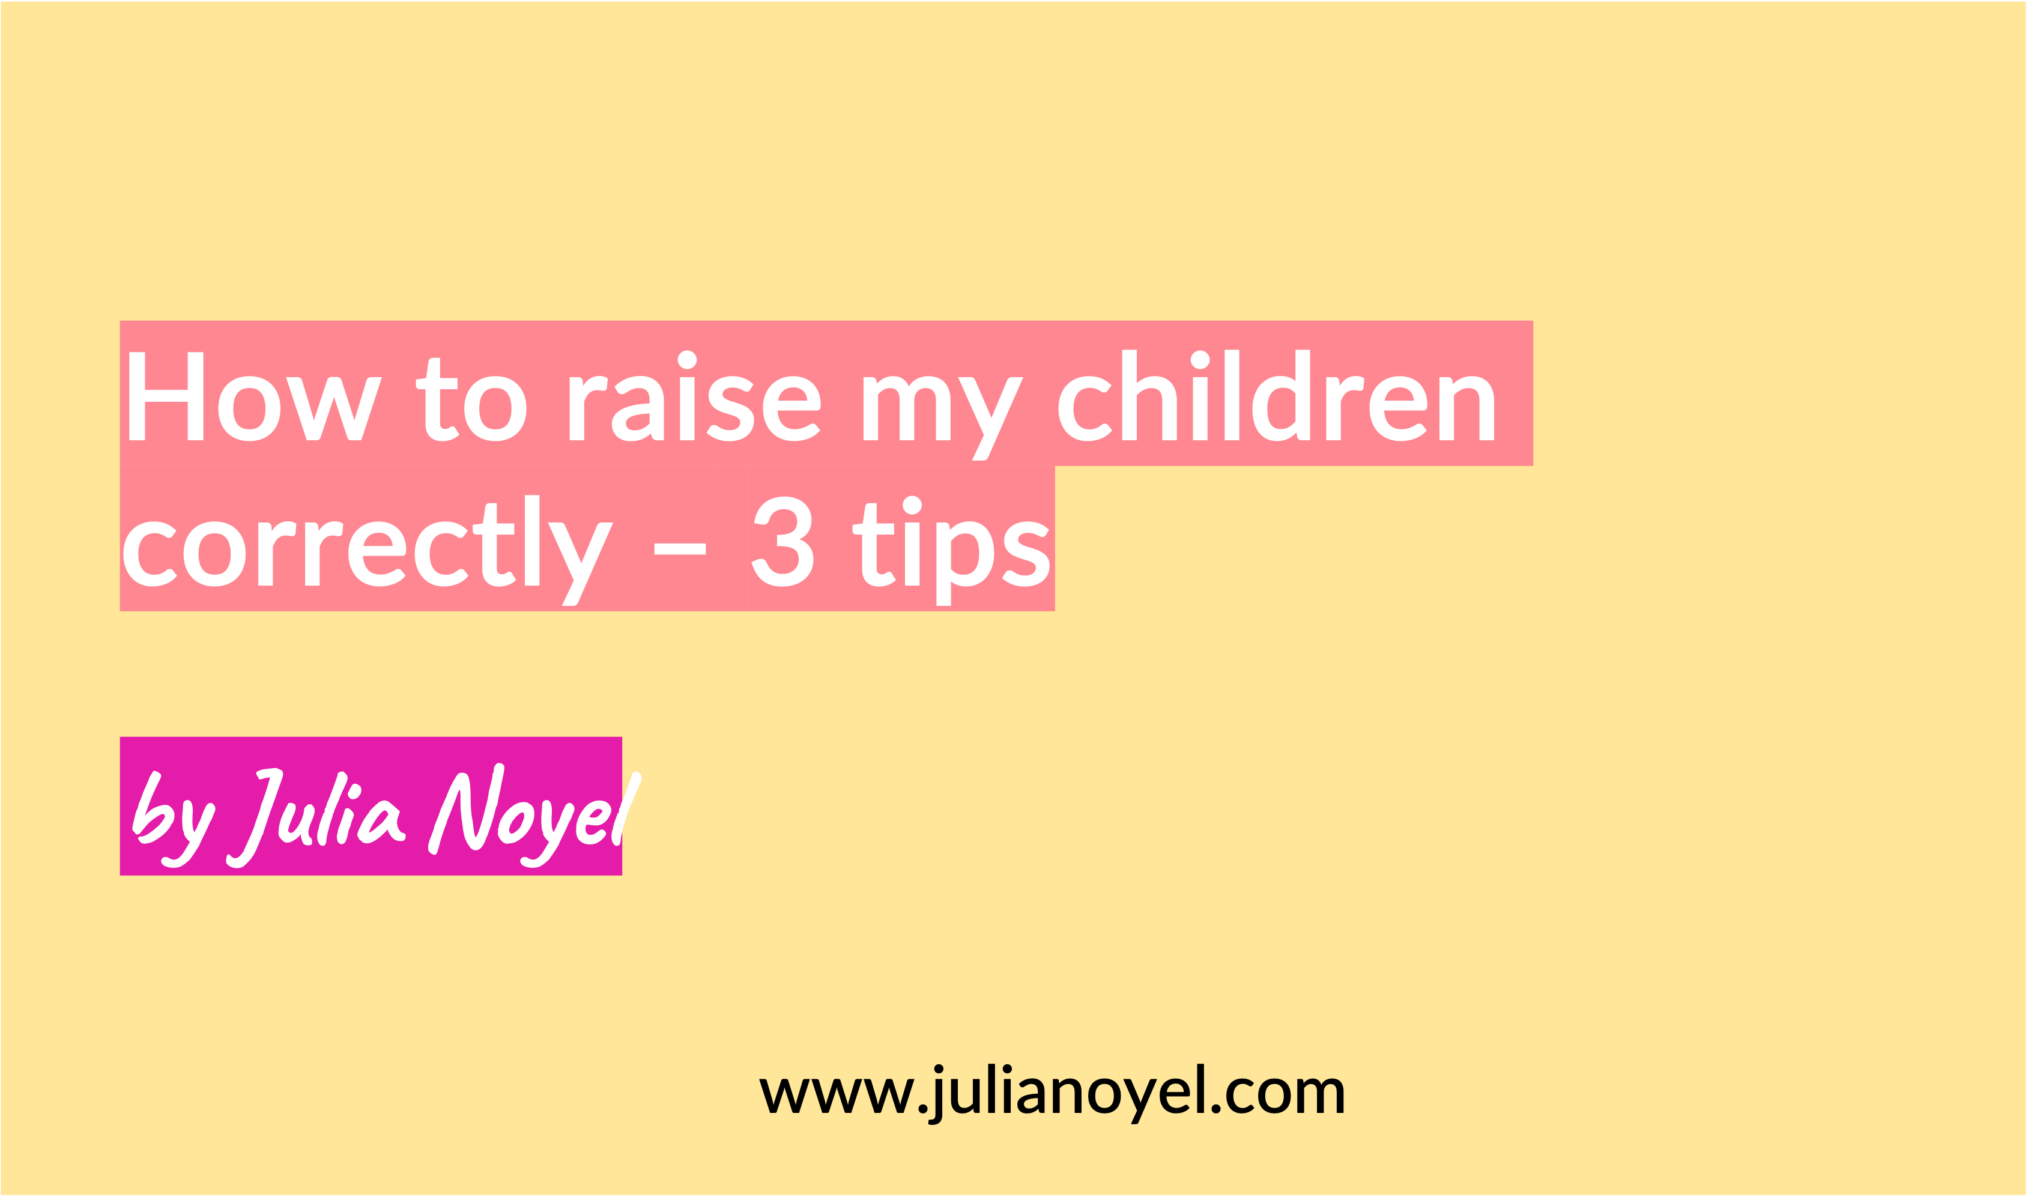 How to raise my children correctly – 3 tips